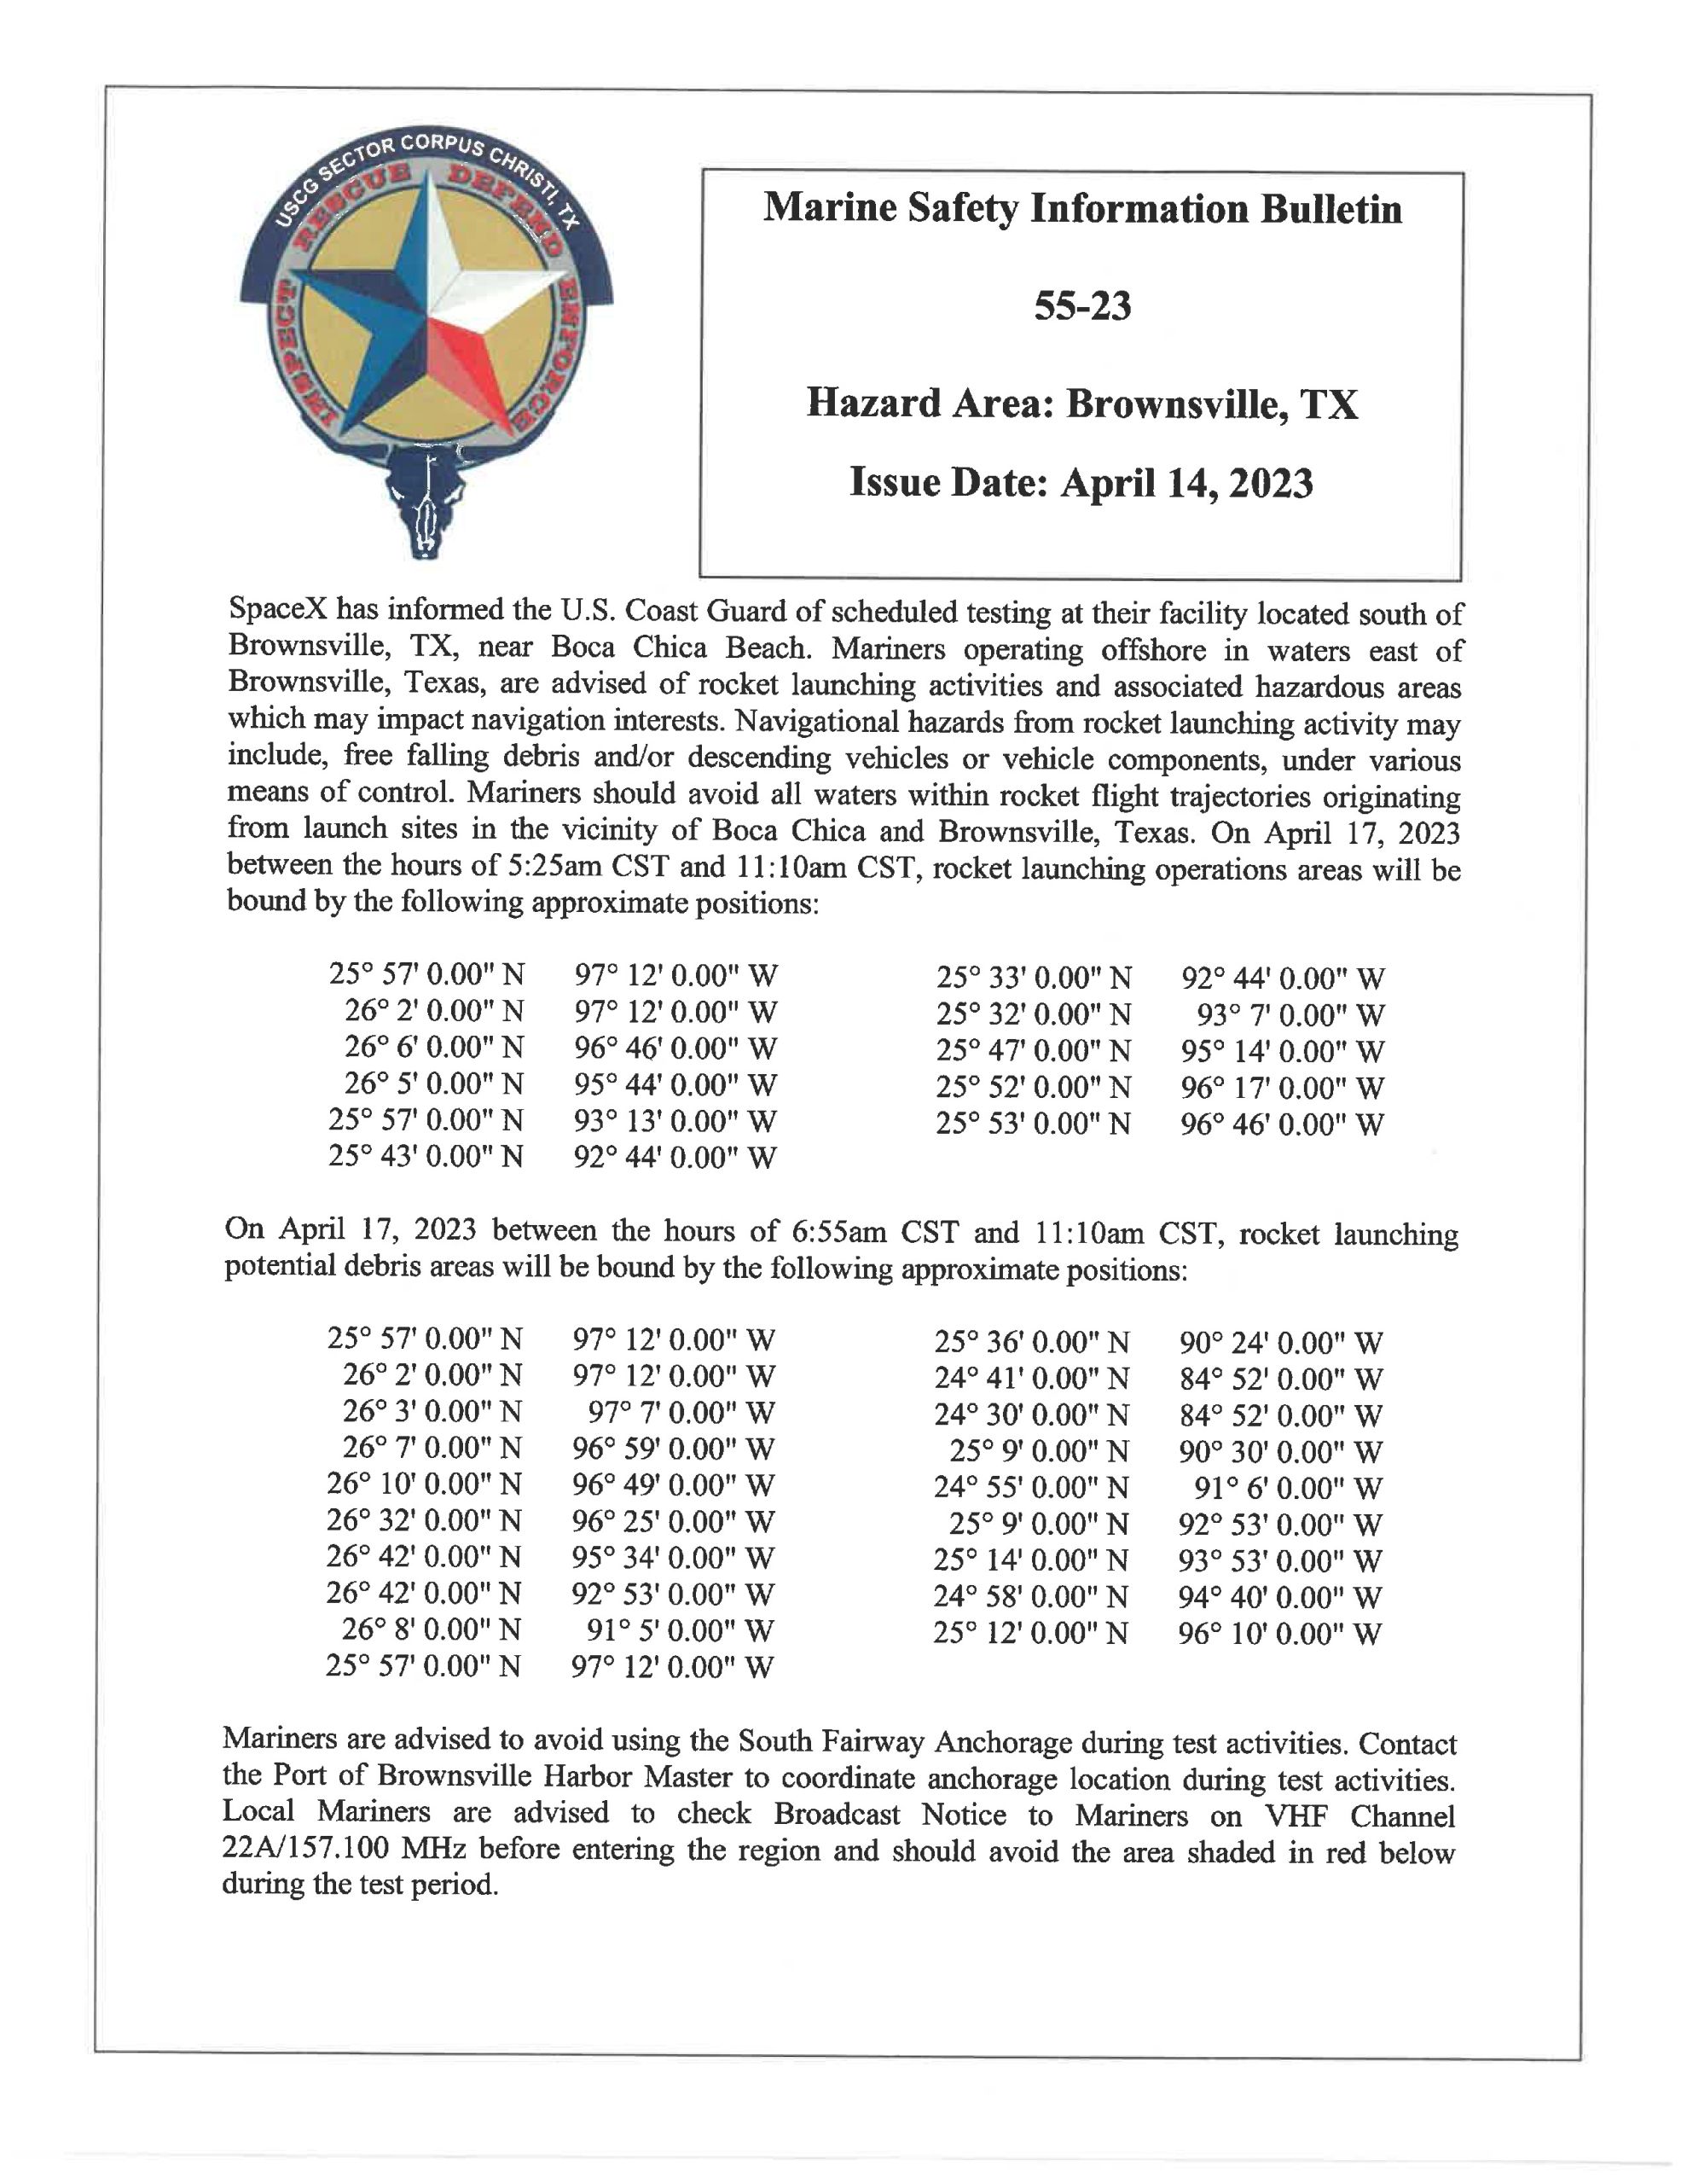 MSIB 55 23 Hazard Area Brownsville TX And Gulf Of Mexico Page 1 Scaled